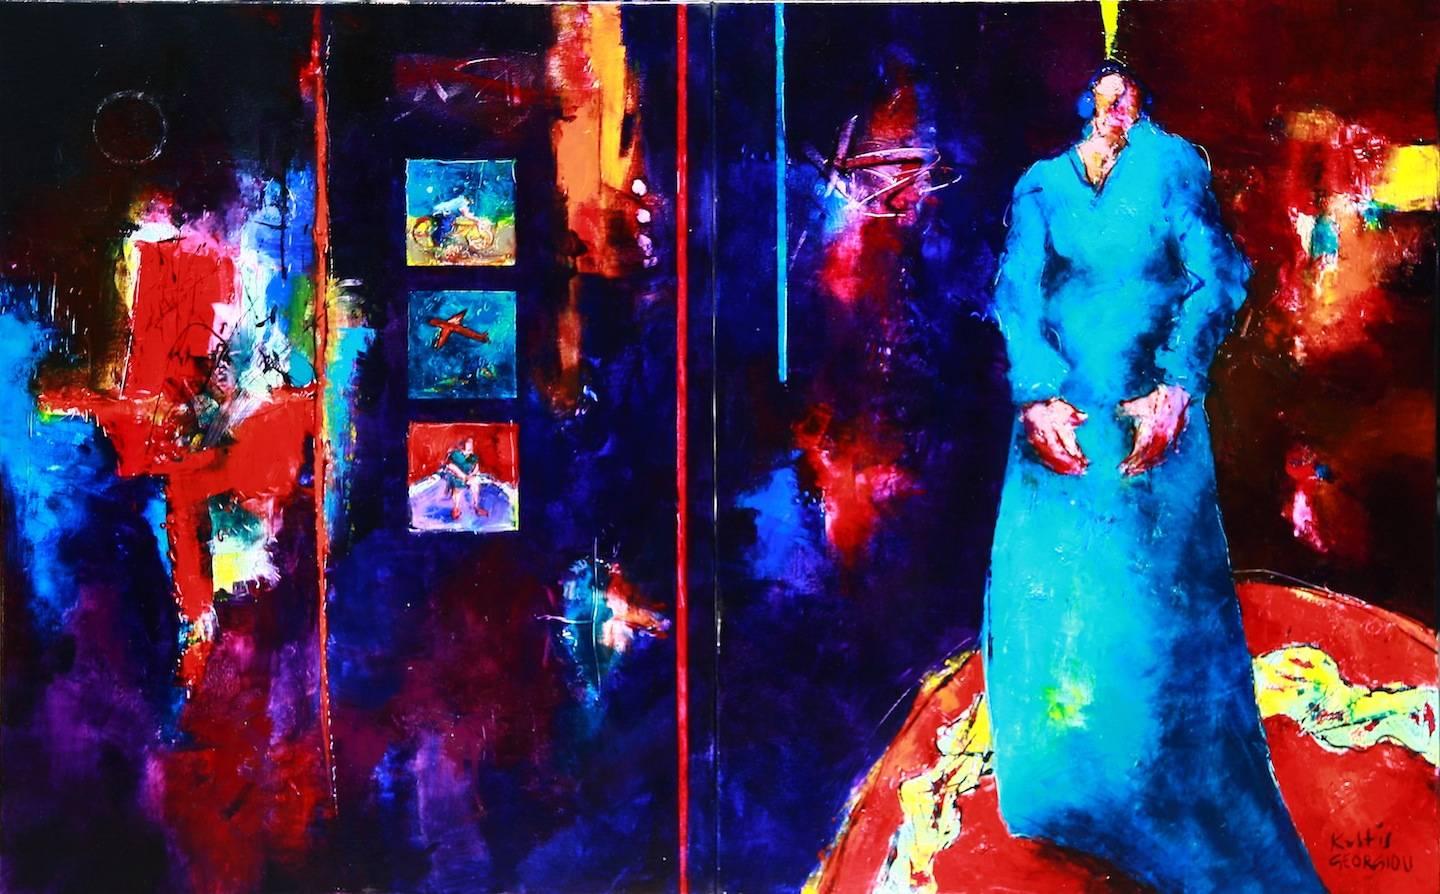 Oil on Canvas (diptych)
100 x 160 cm

Born in Thessaloniki, Greece, Kostis Georgiou studied stage scenery in Florence (1981-1982), painting and sculpture in the School of Fine Arts, Athens (1982-1986) with Dimitris Mitaras and Dimosthenis